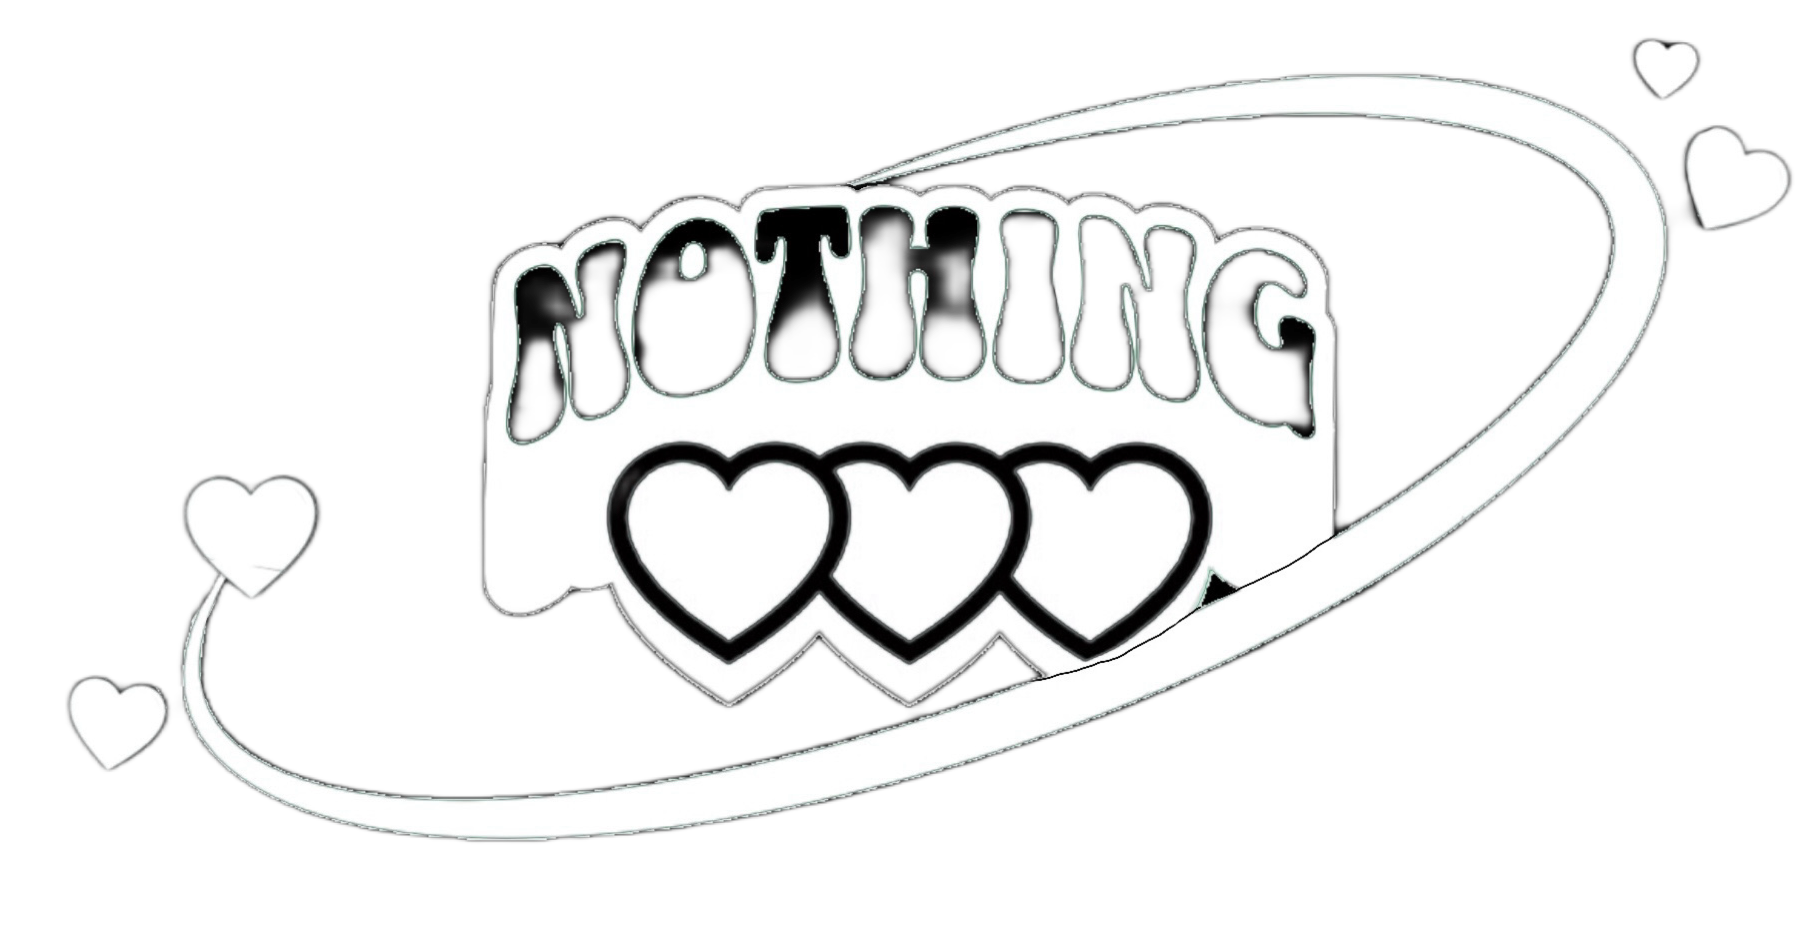 The Nothing Brand